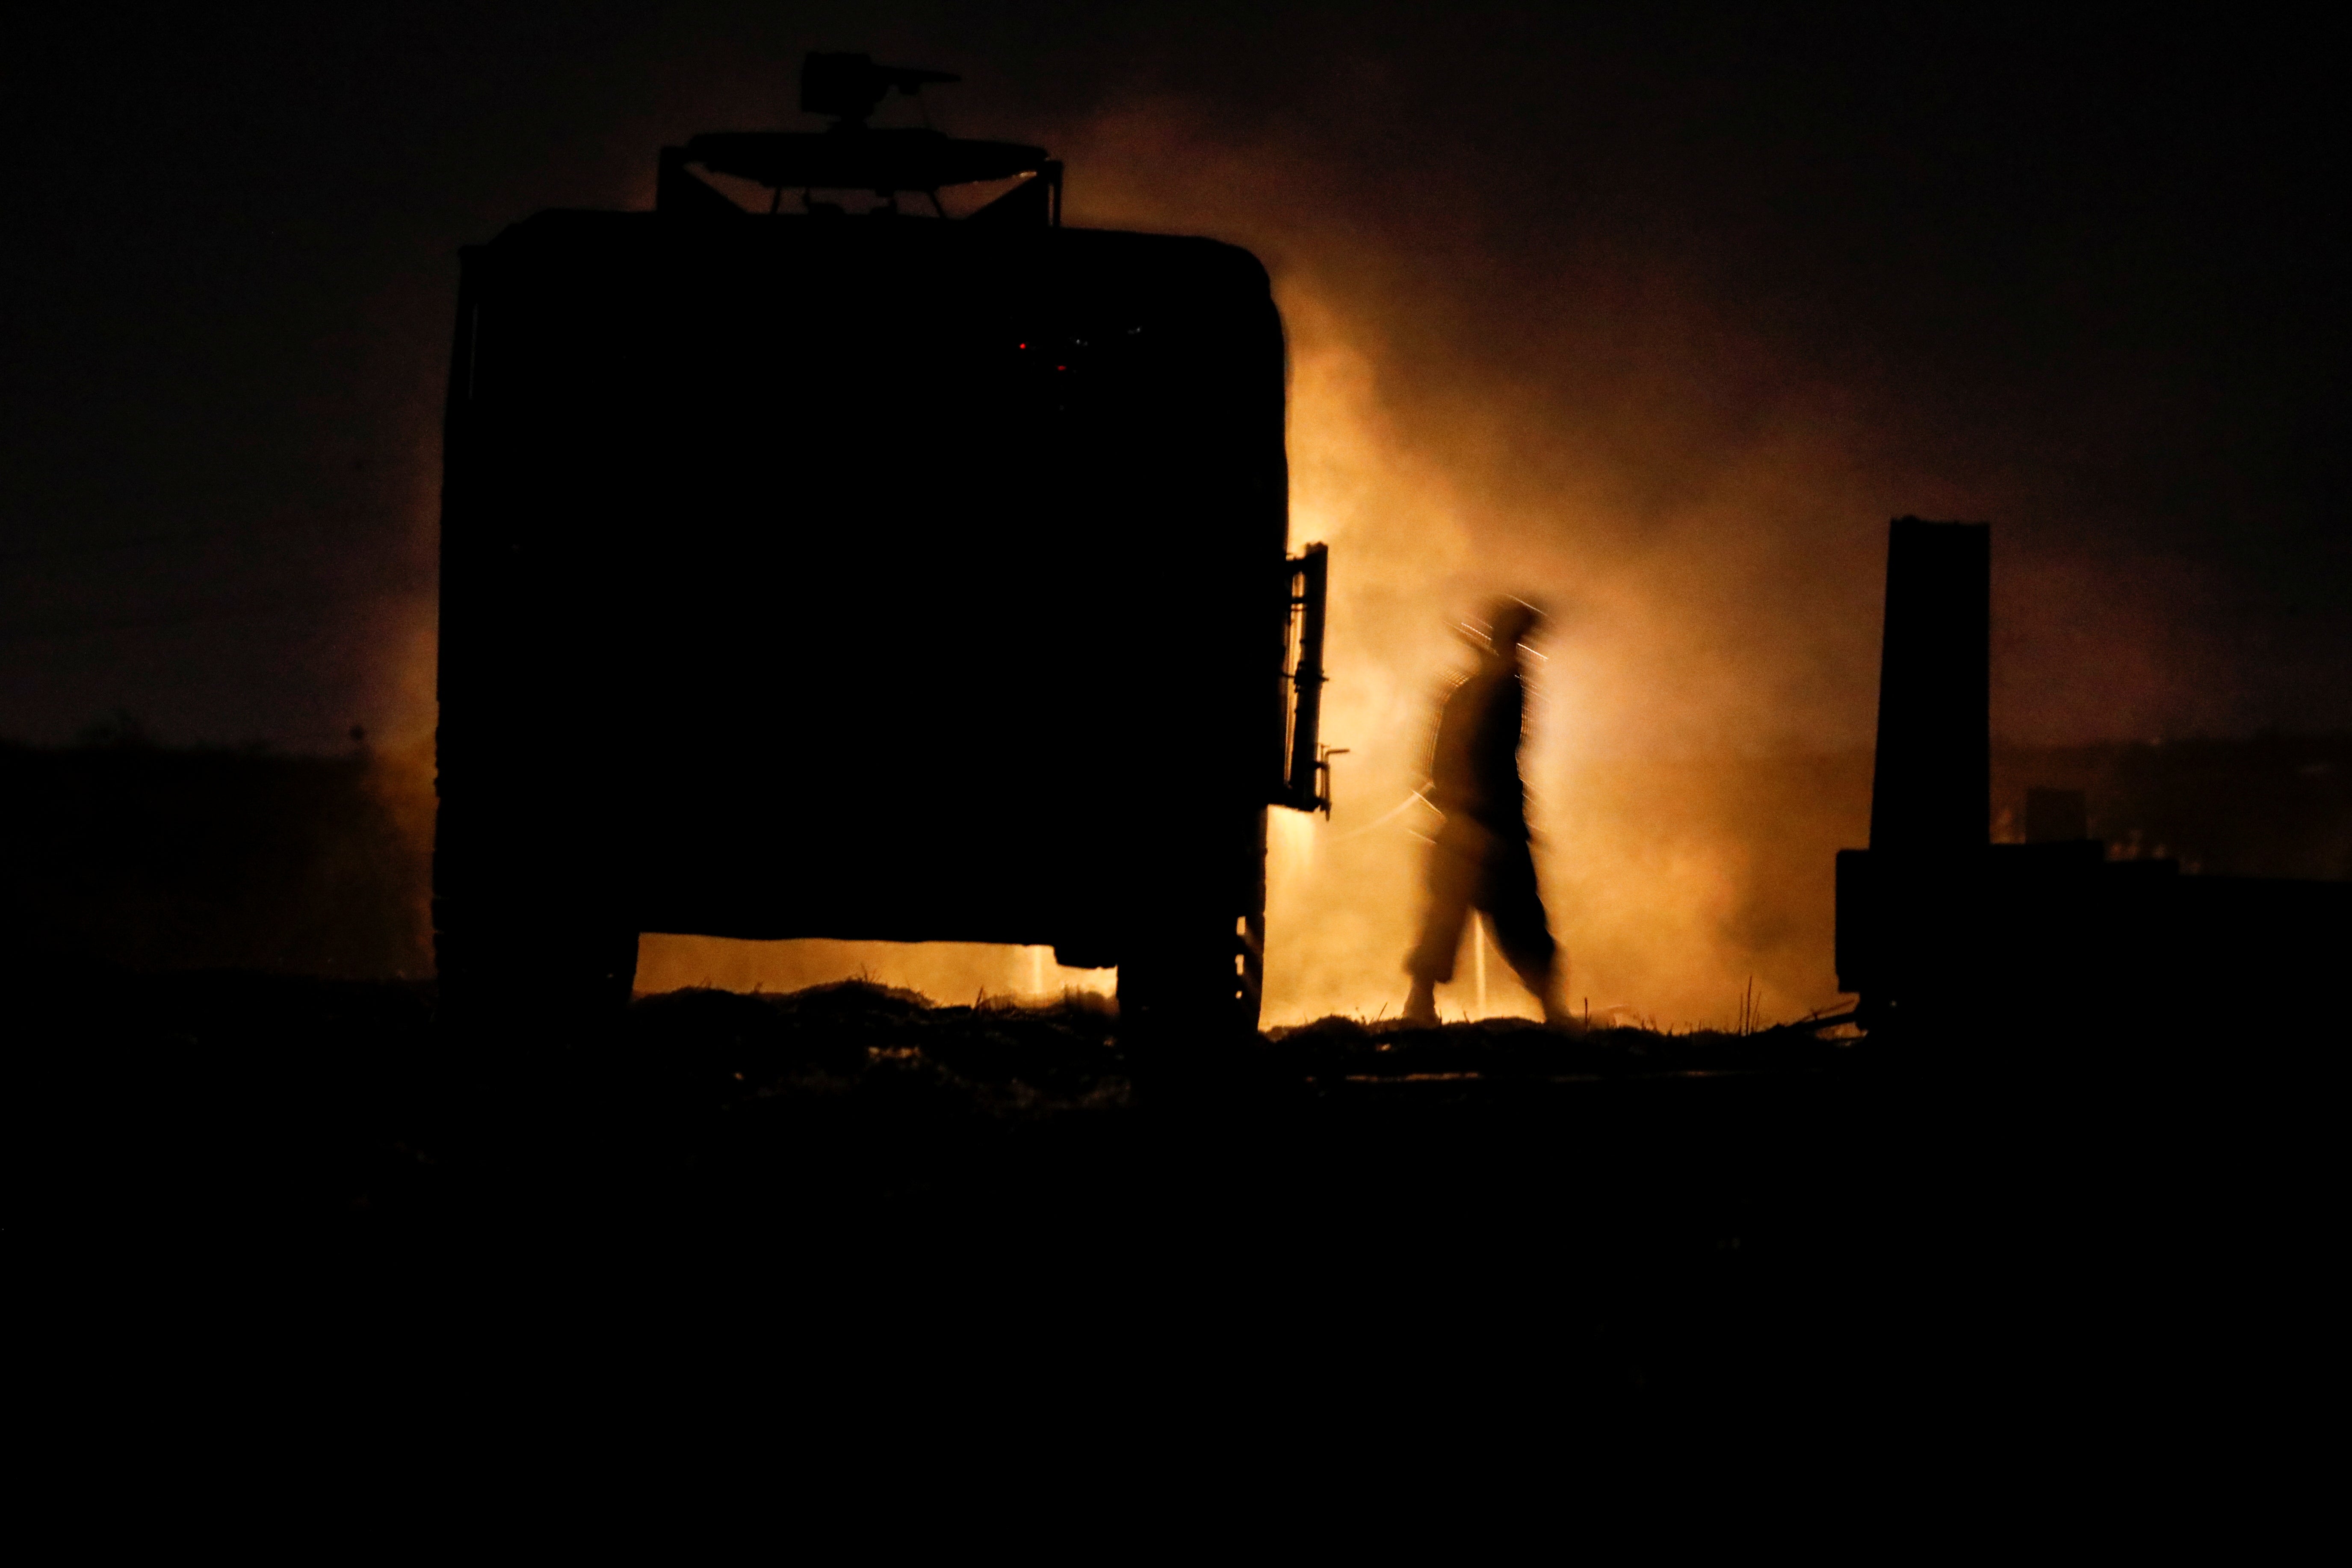 An Israeli soldier walks next to a military vehicle at a mobile artillery unit location on the Israeli side of the border with Gaza